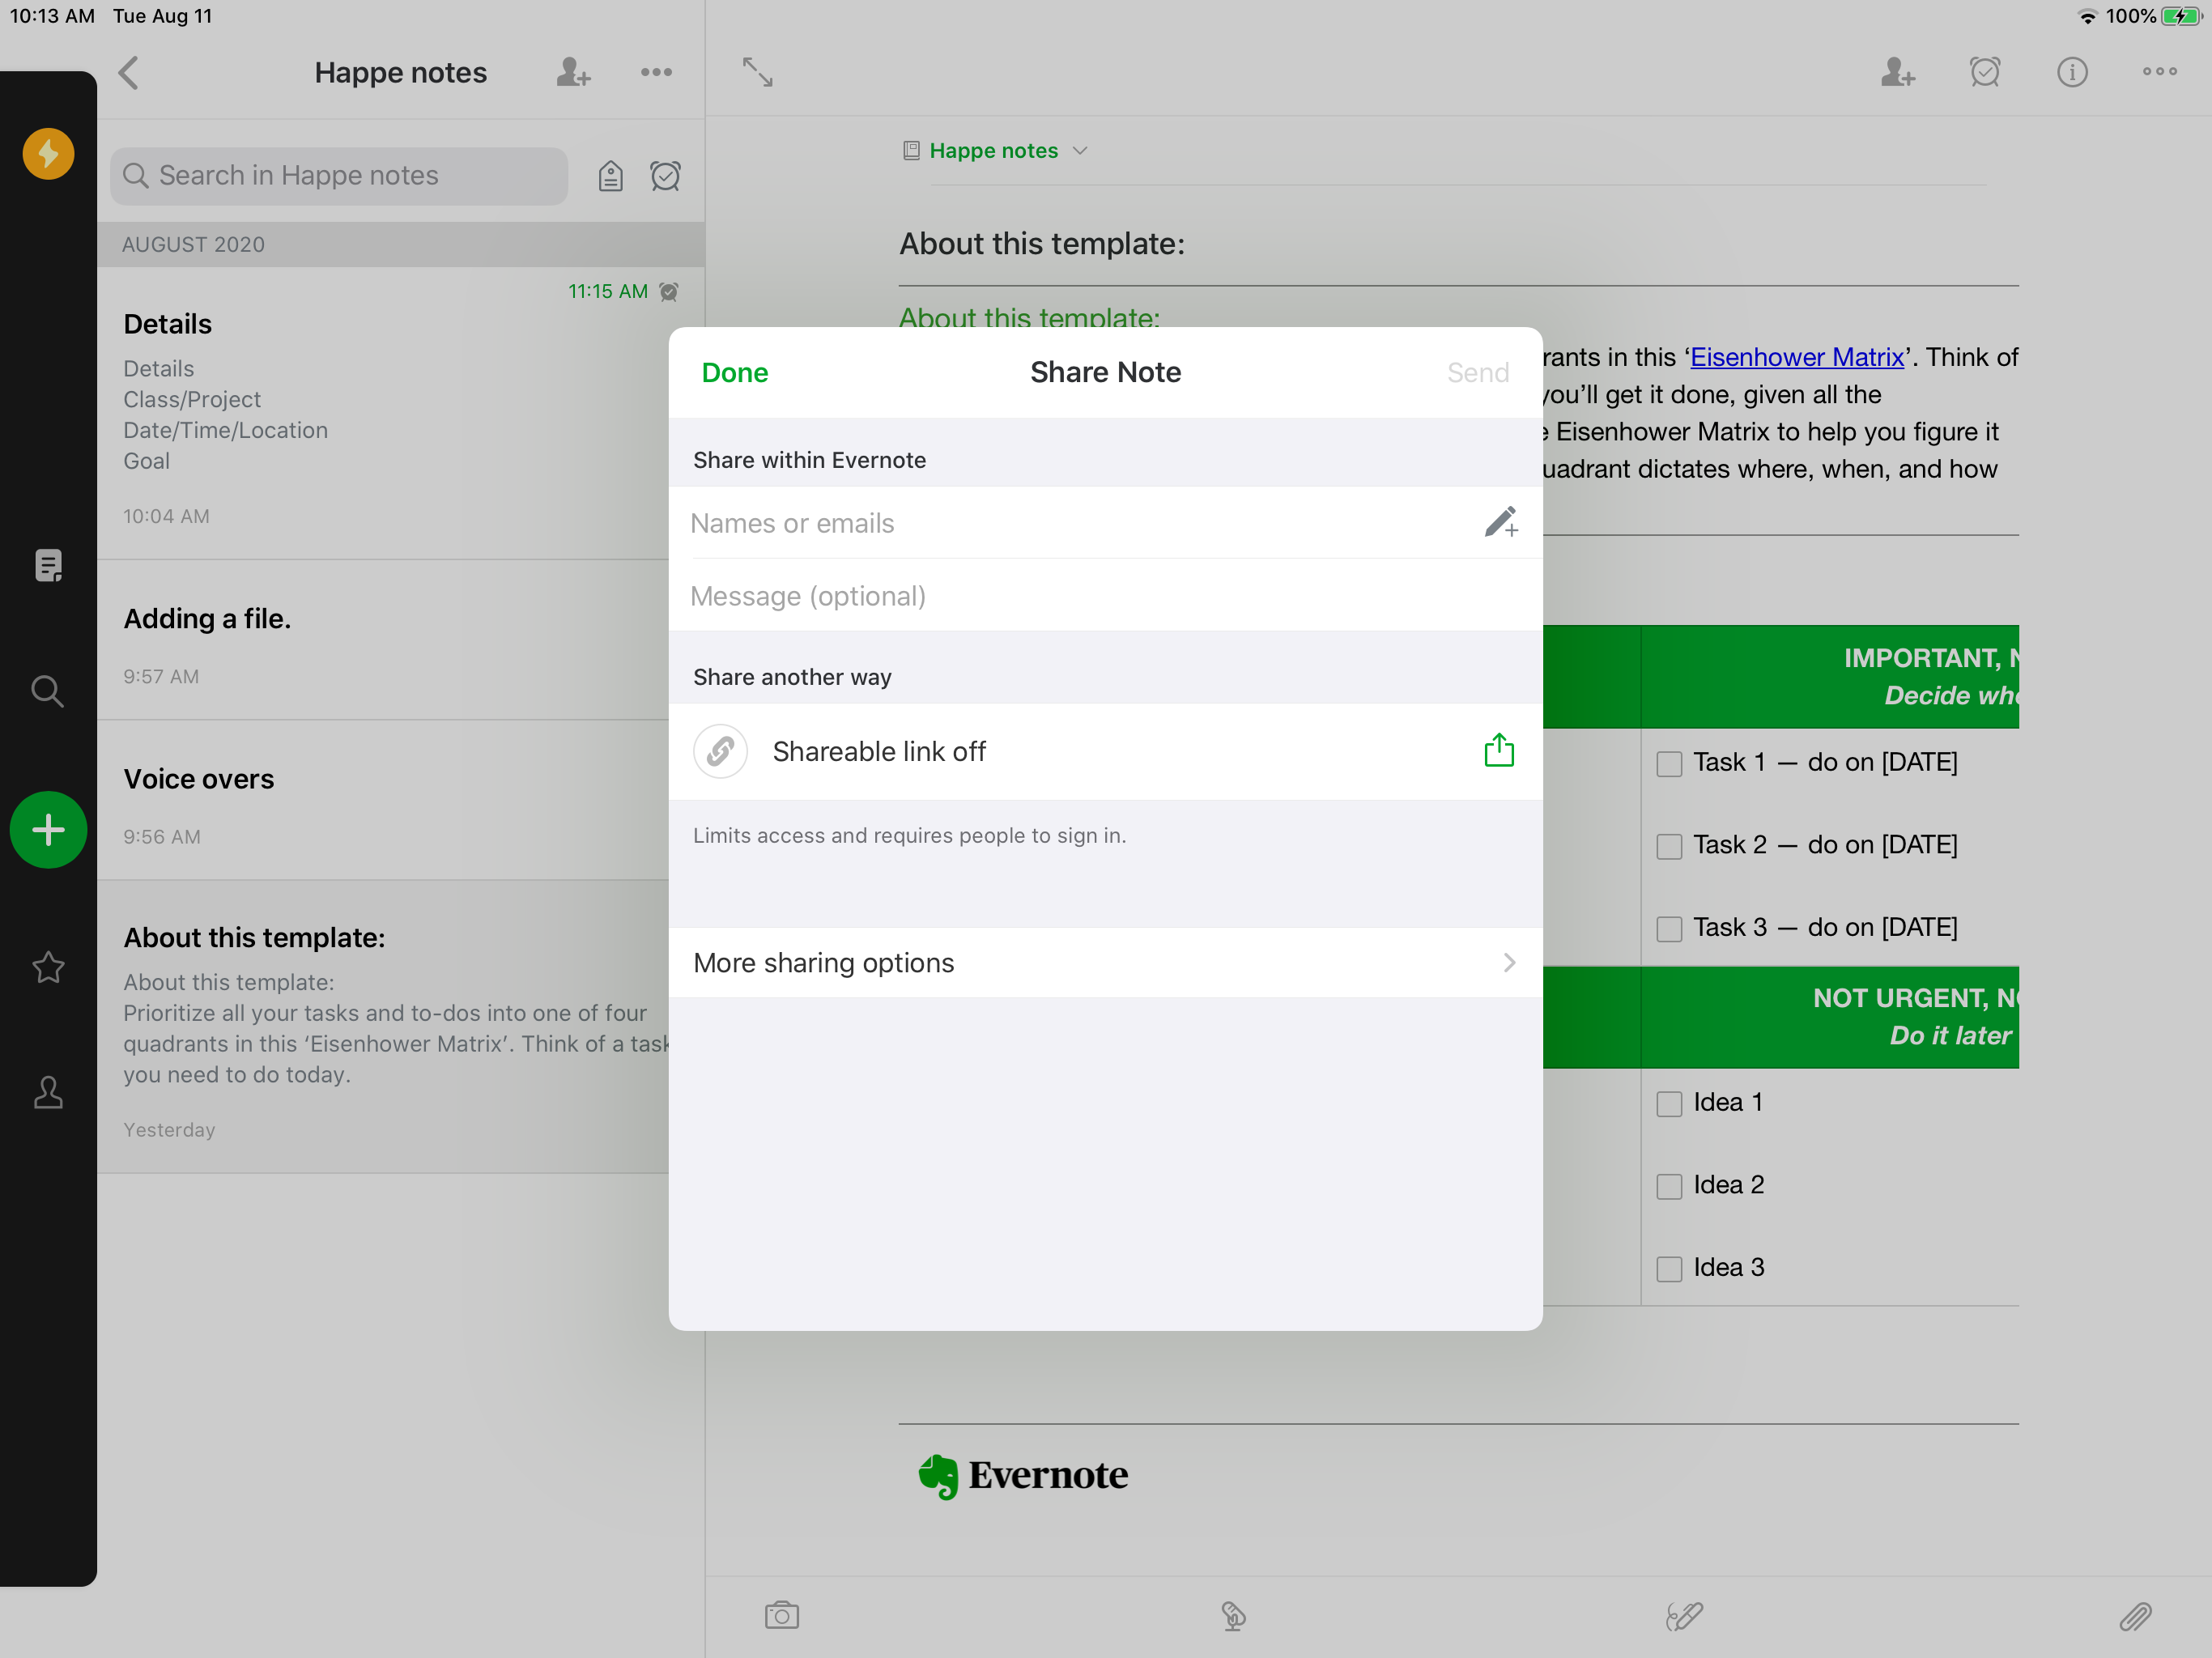 evernote student pricing